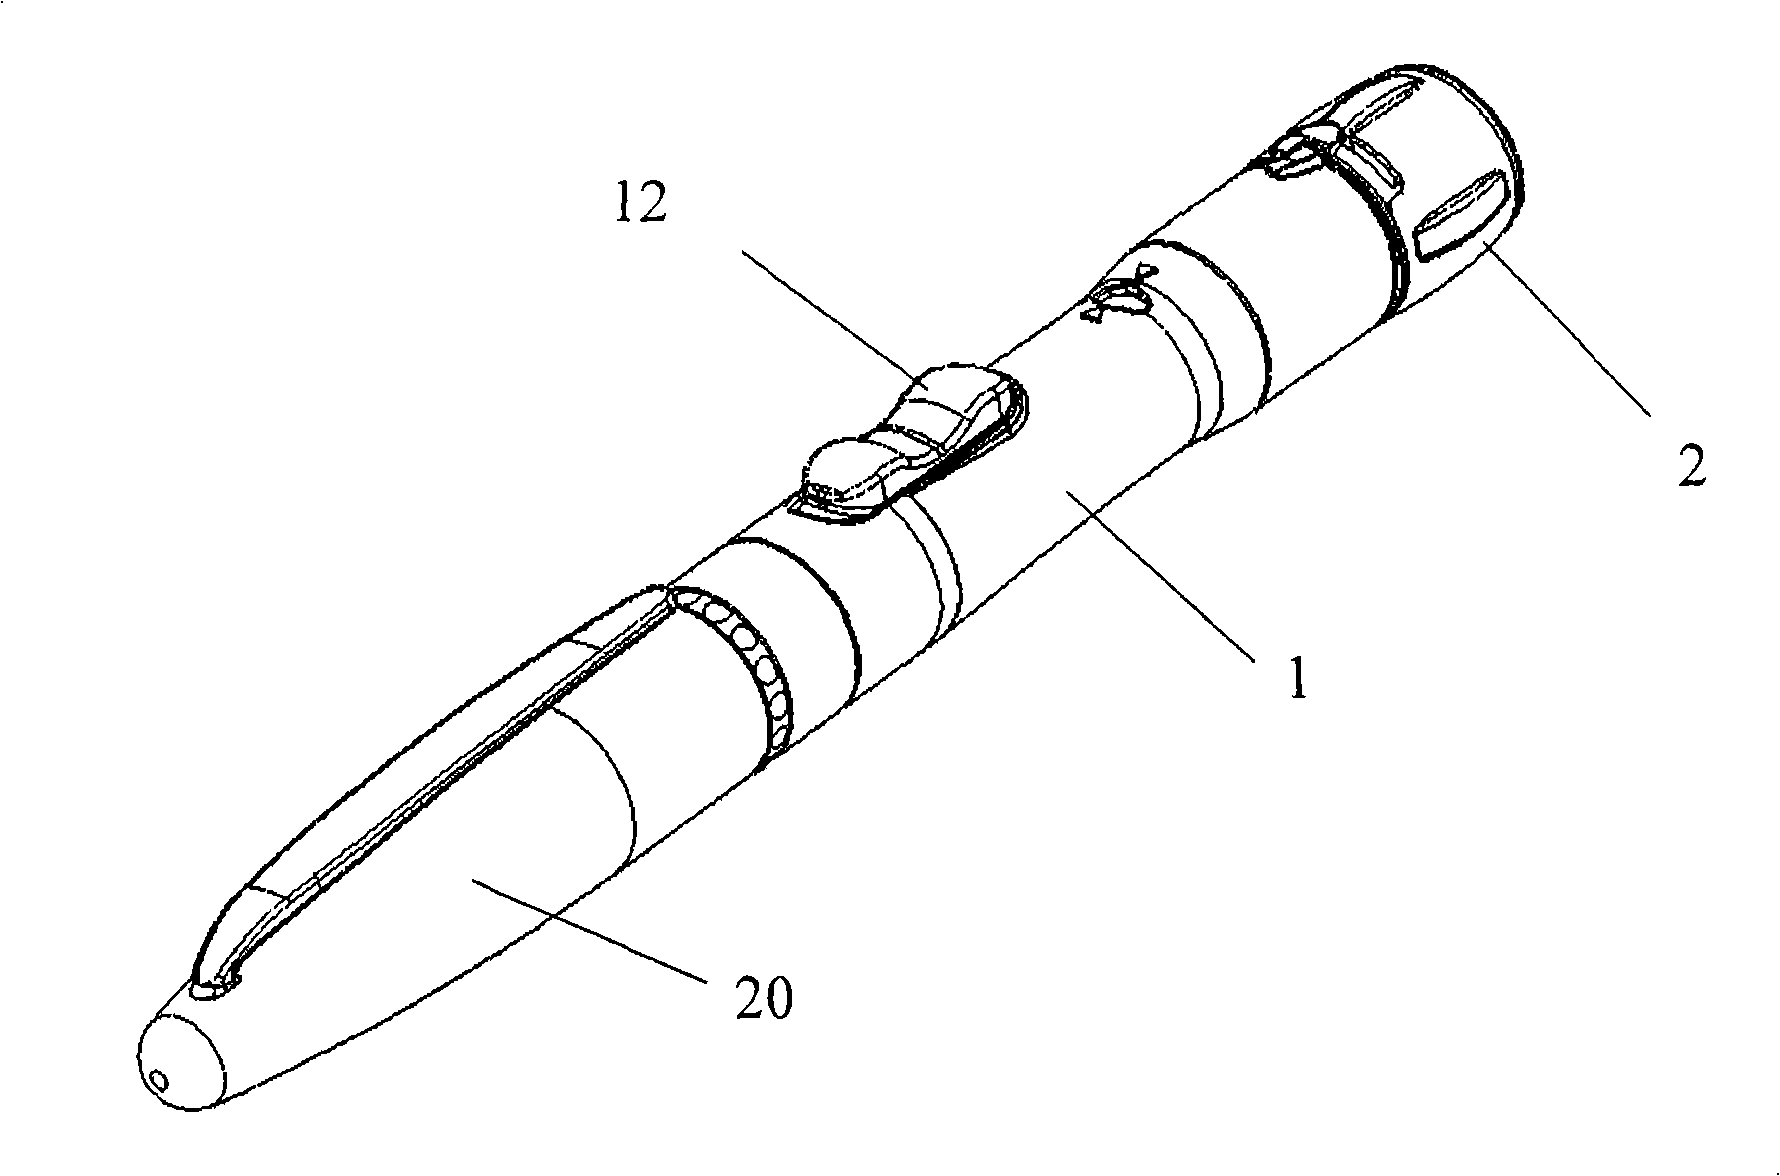 Injection method and apparatus